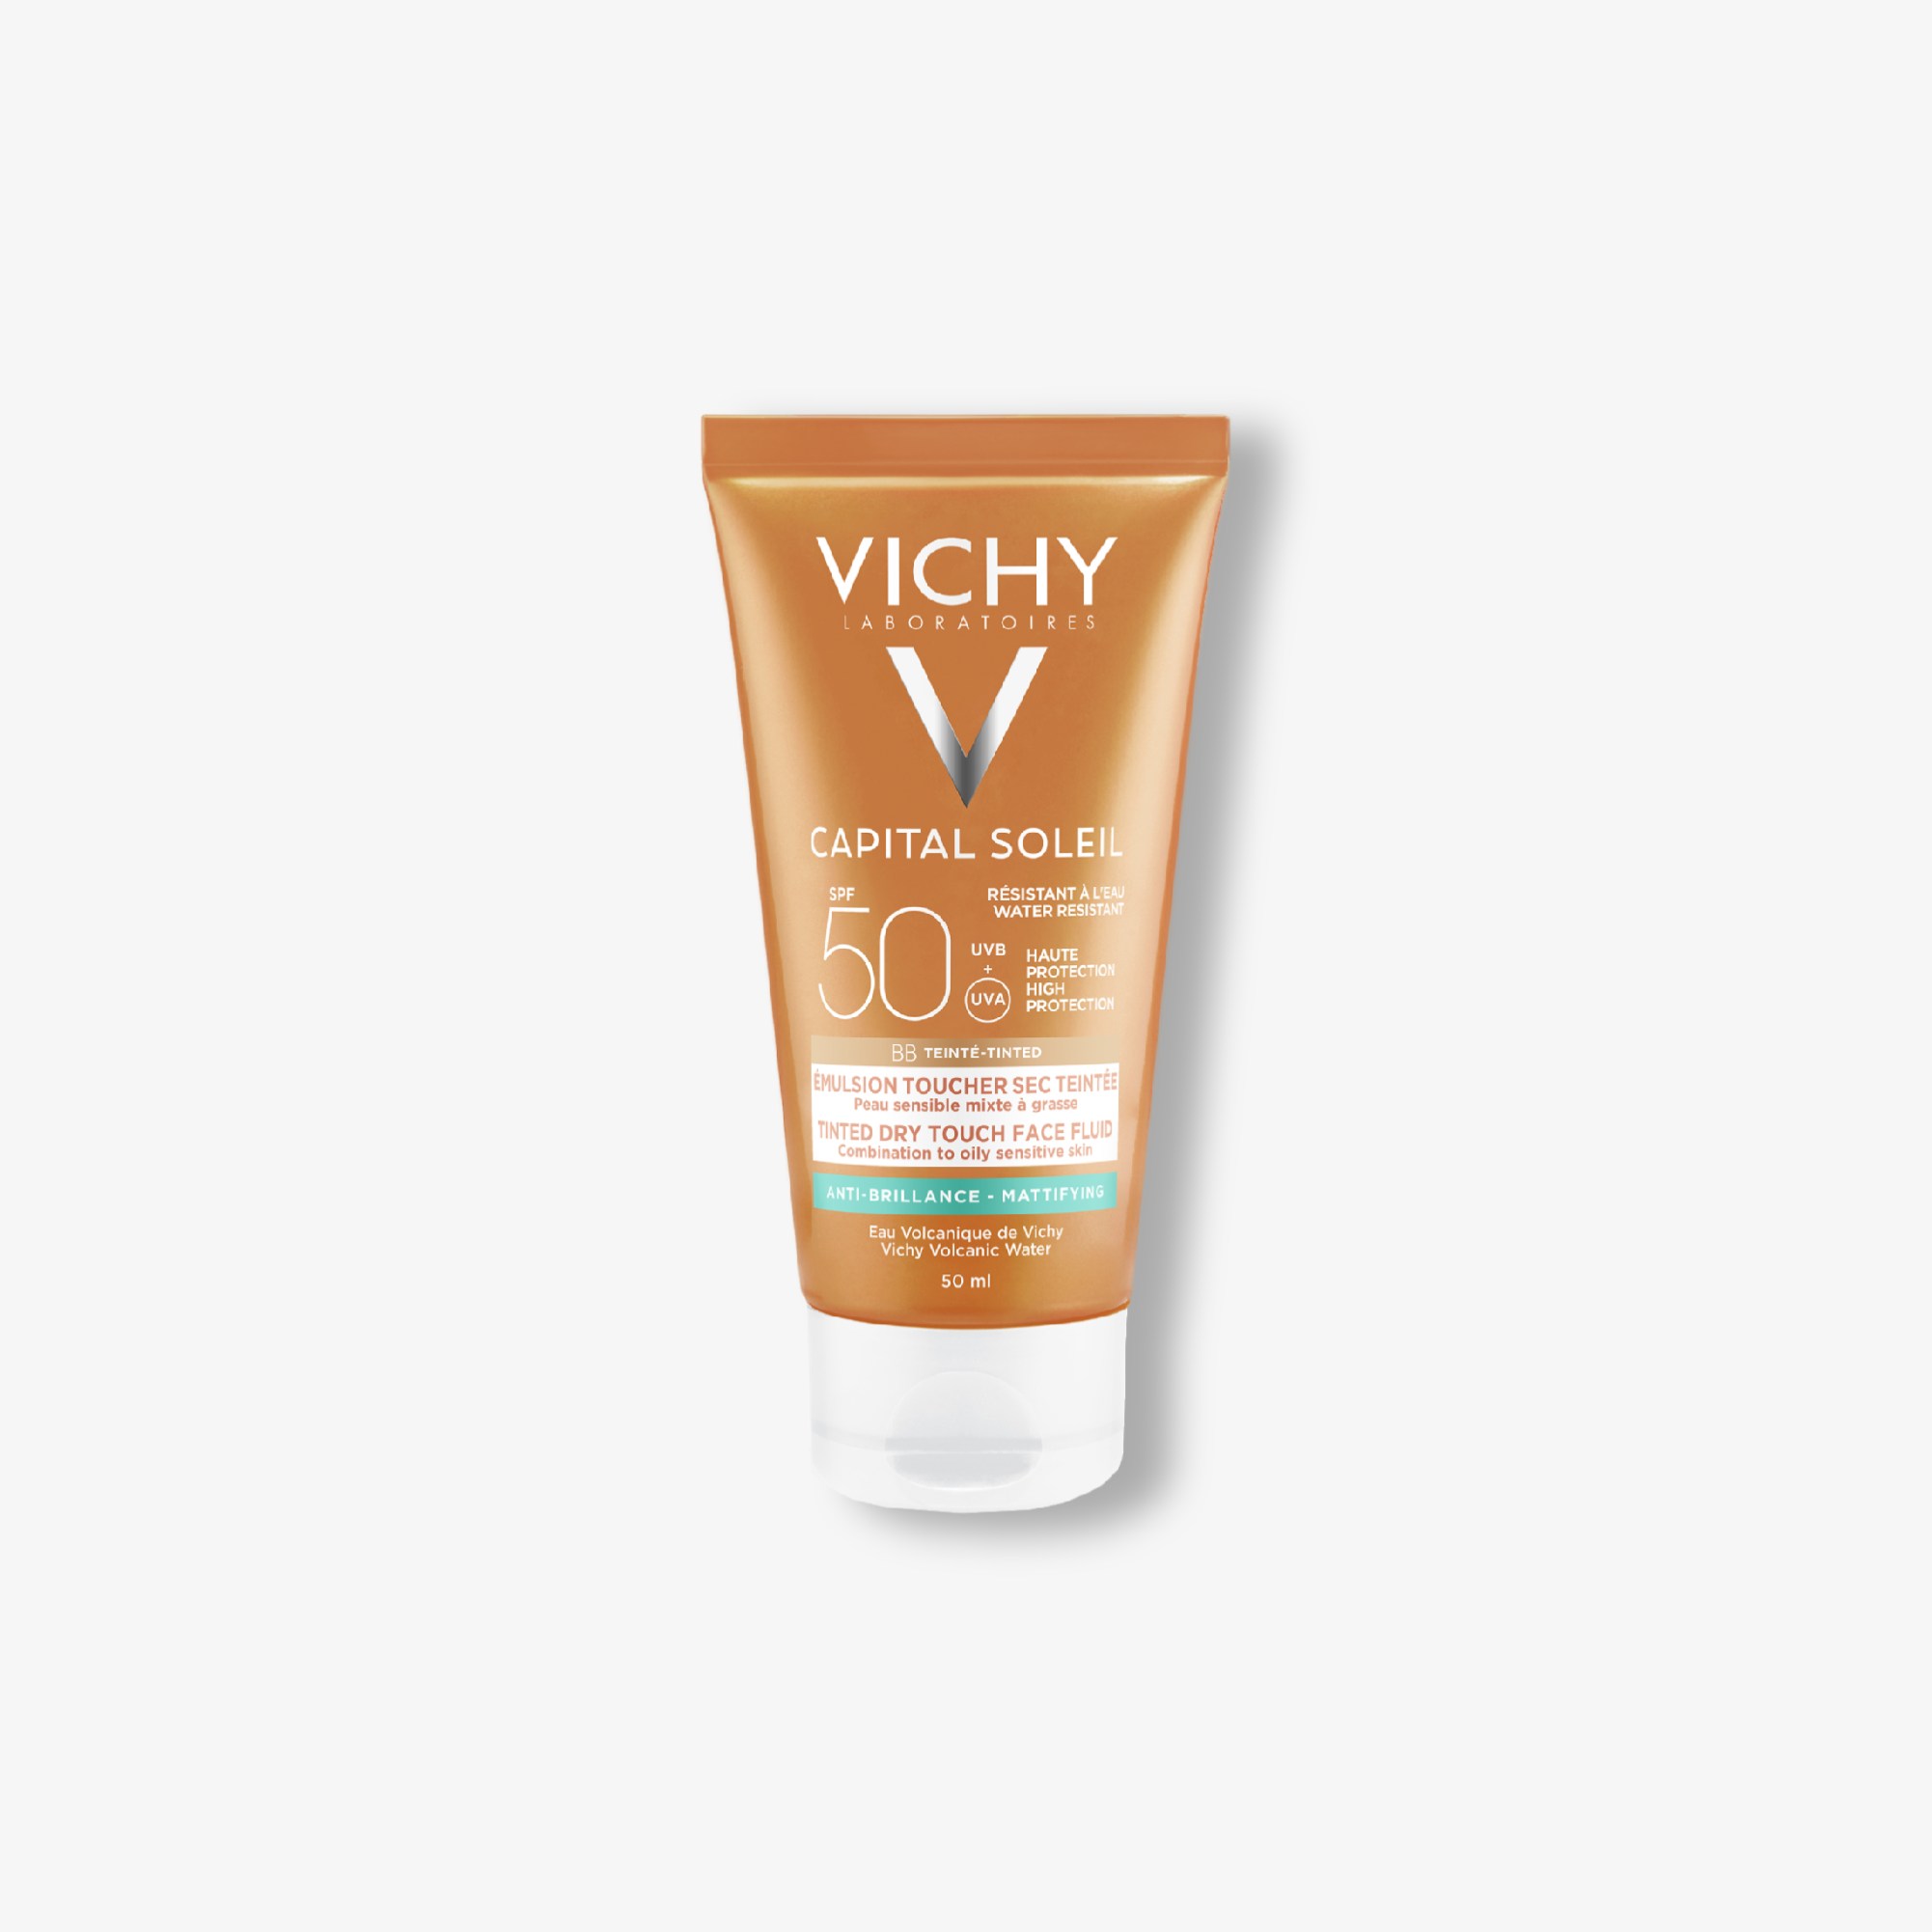 VICHY_CAPITAL_SOLEIL_BB_TINTED_DRY_TOUCH_FLUID_FACE